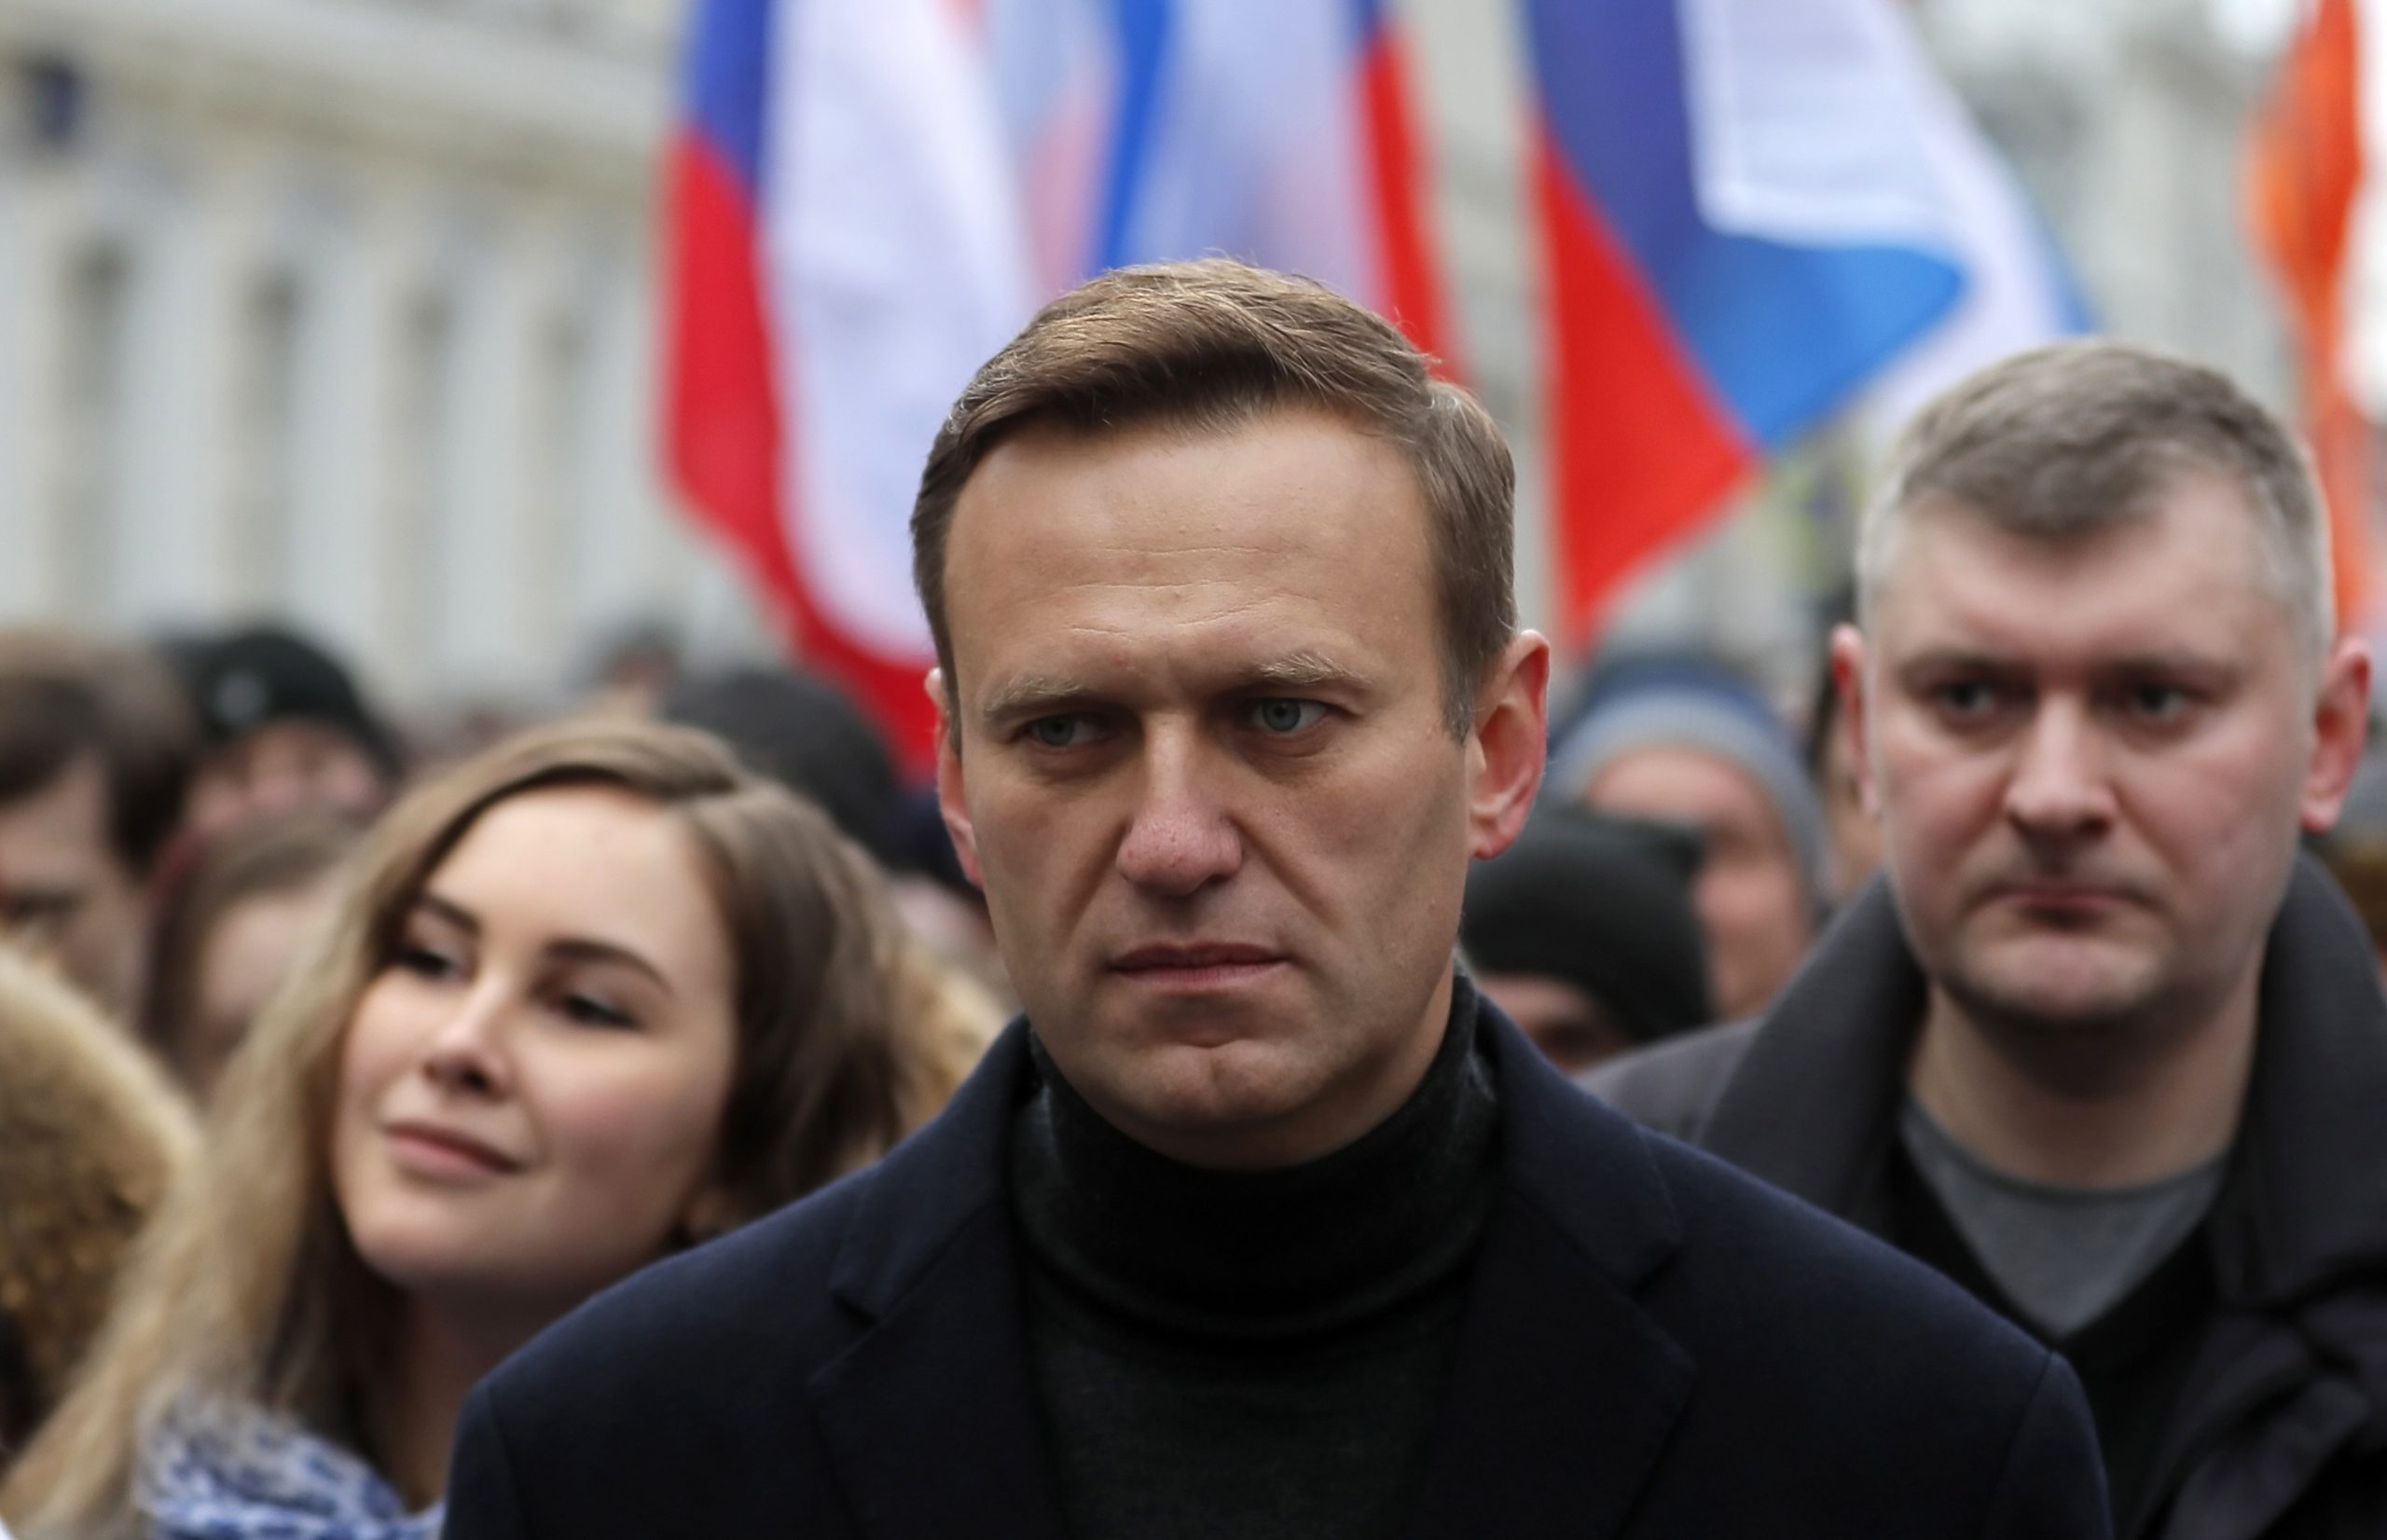 epa08982071 (FILE) - Russian opposition leader and anti-corruption activist Alexei Navalny (C) takes part in a memorial march for Boris Nemtsov marking the fifth anniversary of his assassination in Moscow, Russia, 29 February 2020 (reissued 02 February 2021). According to reports 02 February 2021, Alexei Navalny was sentenced by a court in Moscow to prison for 3,5 years.  EPA/YURI KOCHETKOV *** Local Caption *** 56313826